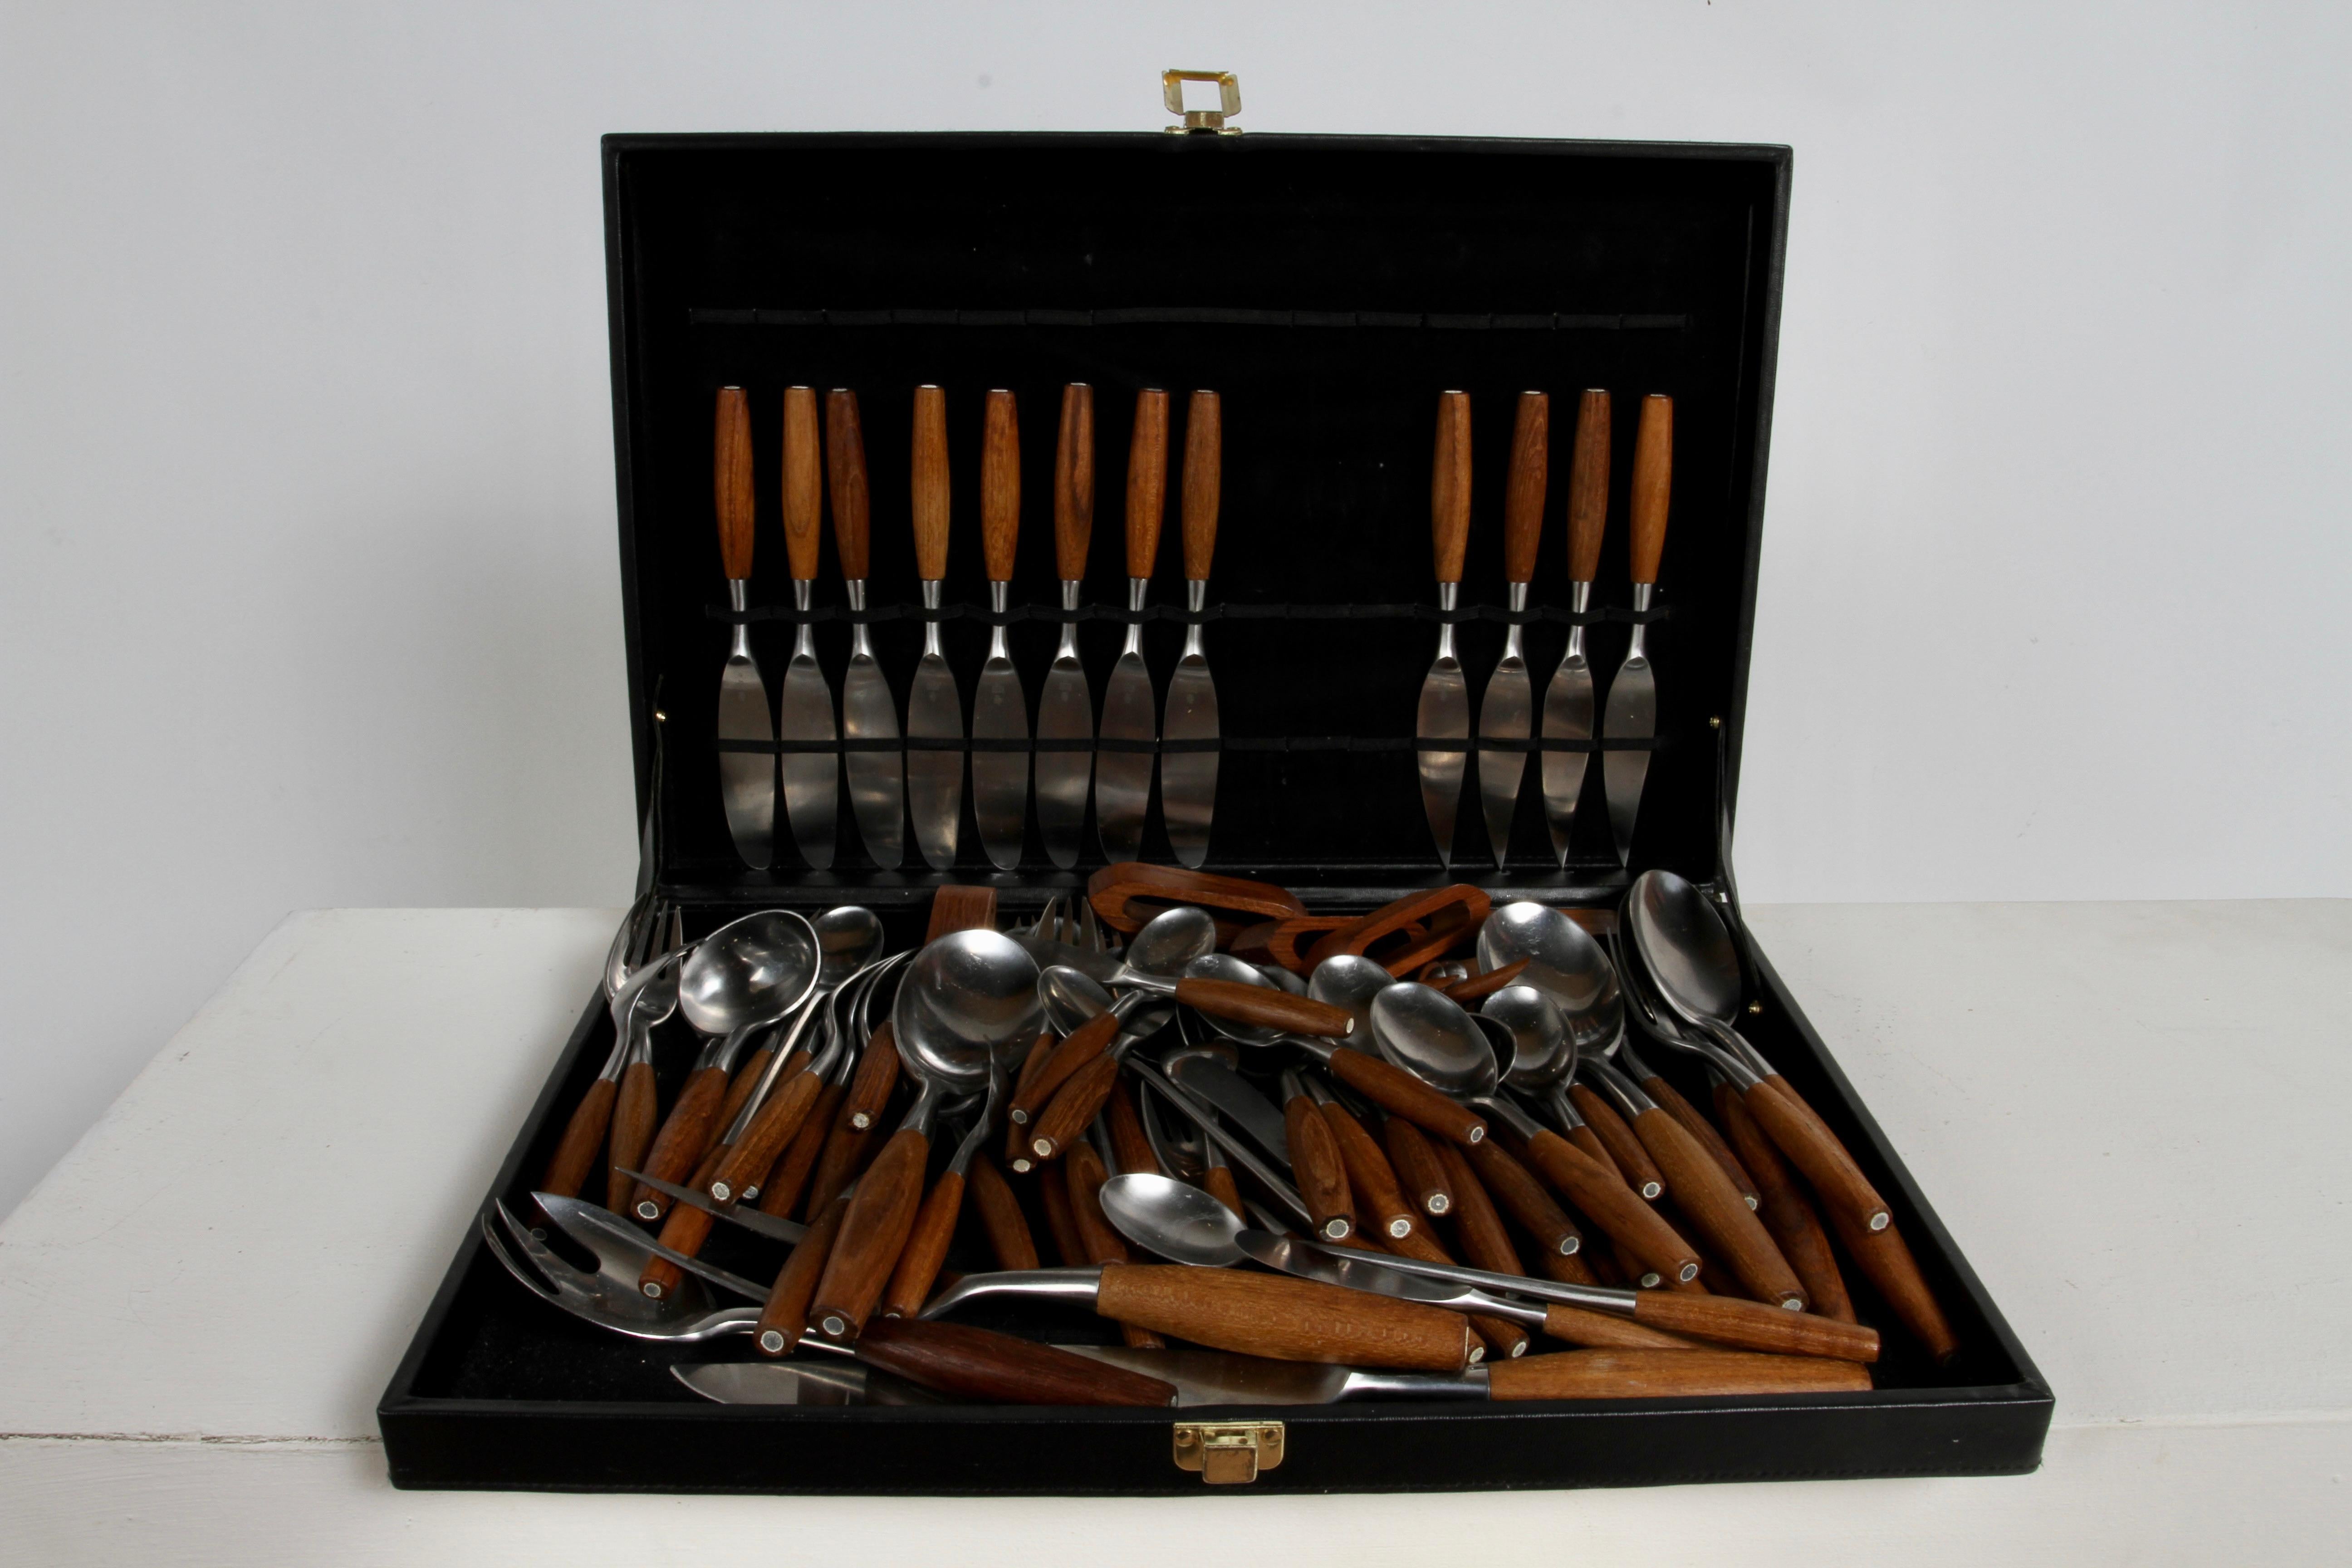 1960s Dansk Designs Danish modern designed by Jens H Quistgaard Fjord flatware service set for 8 includes 92 pieces and case.
Constructed in teak and stainless steel. Marked Dansk Designs Germany JHQ. Original vintage unrestored condition, one